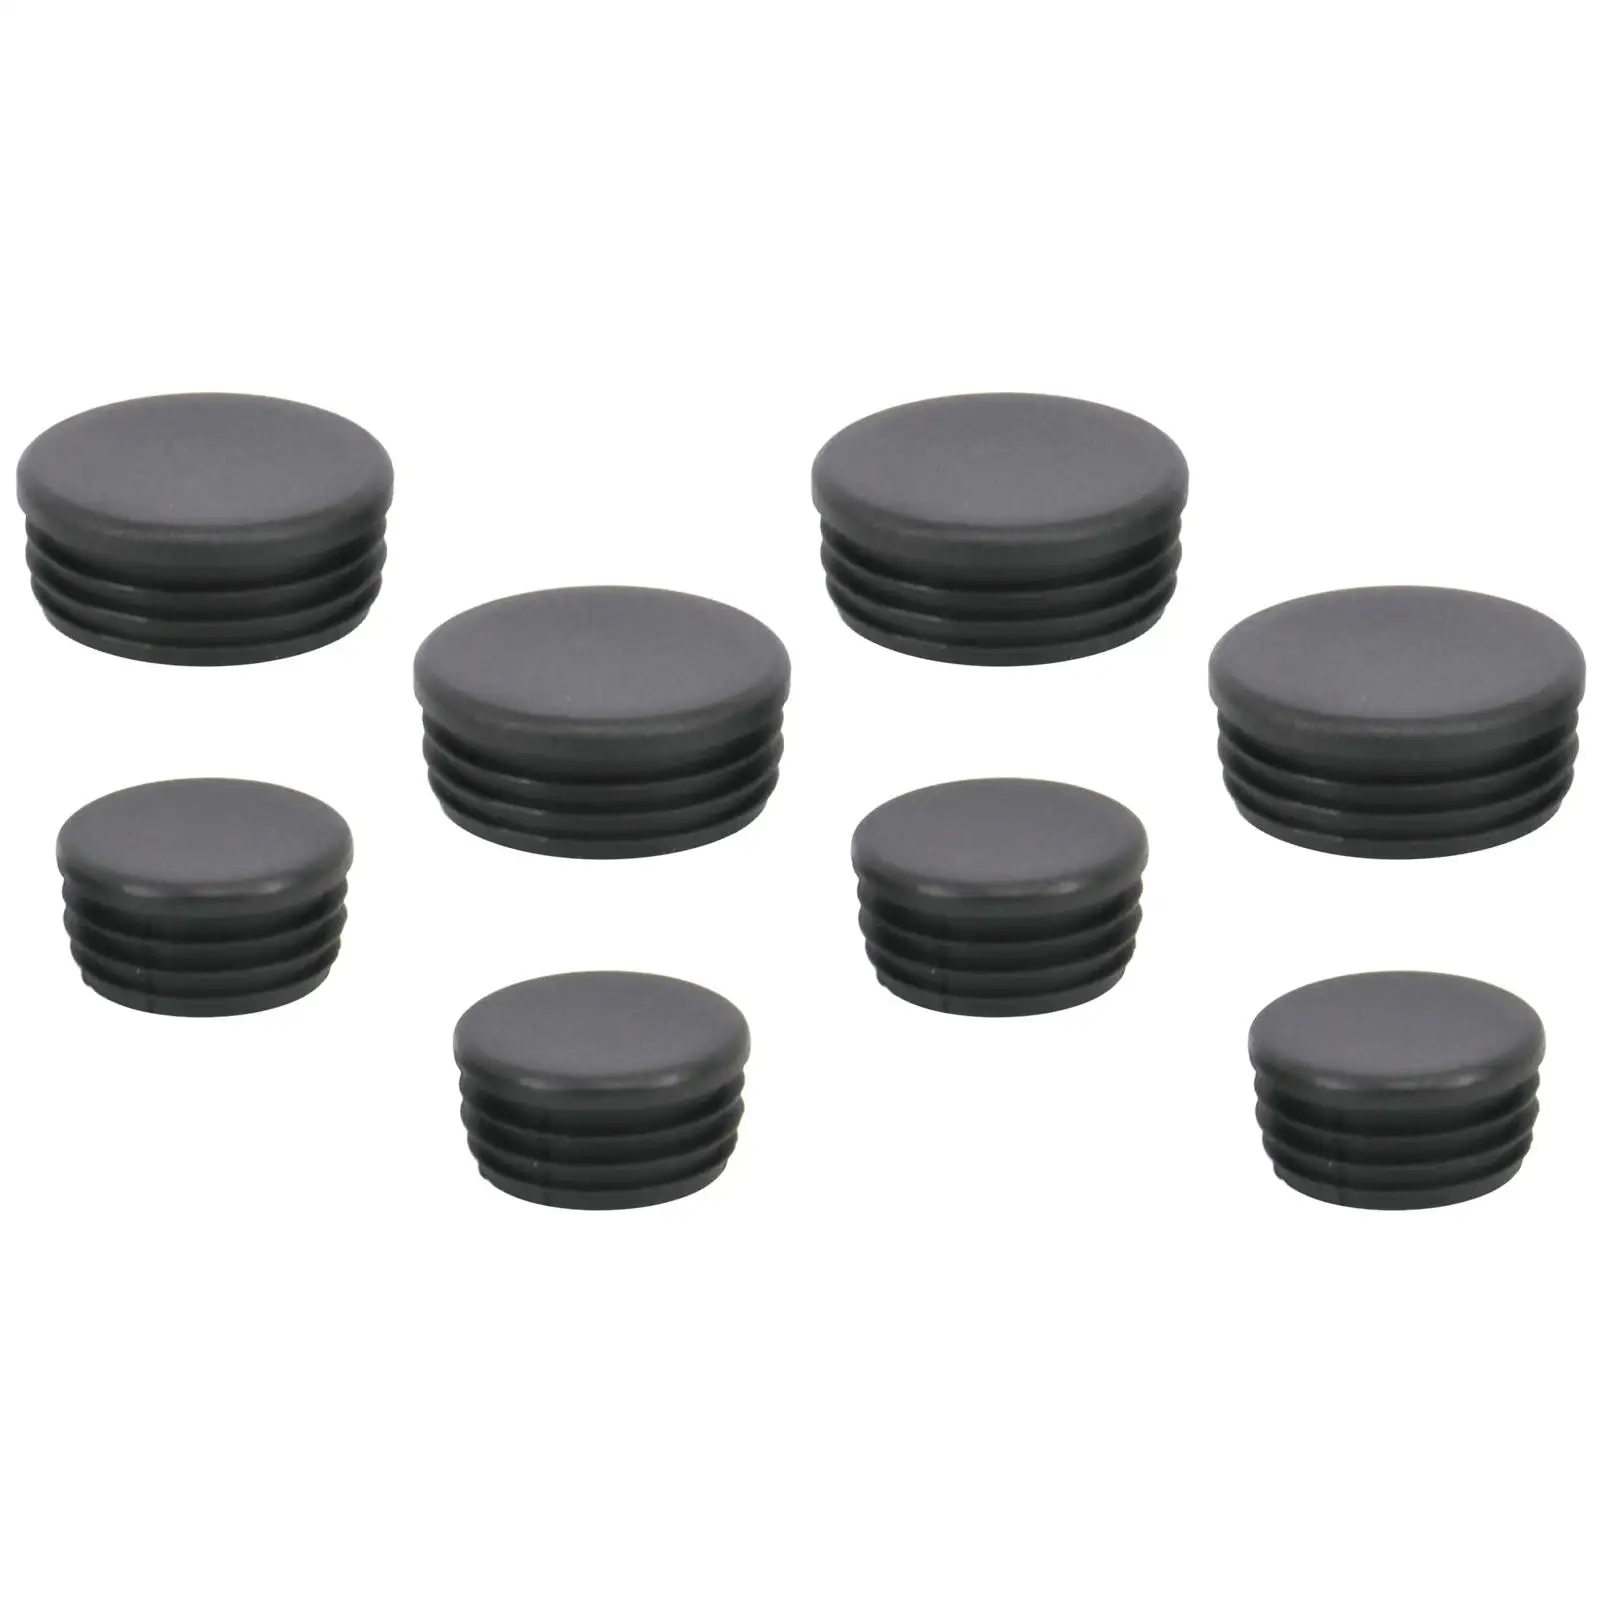 8Pcs Waterproof Chassis Plug Covers Dustproof Auto Parts Protect Covers Plug Hole Covers Fit for Suzuki Jimny Jb64 Jb74 18-Up